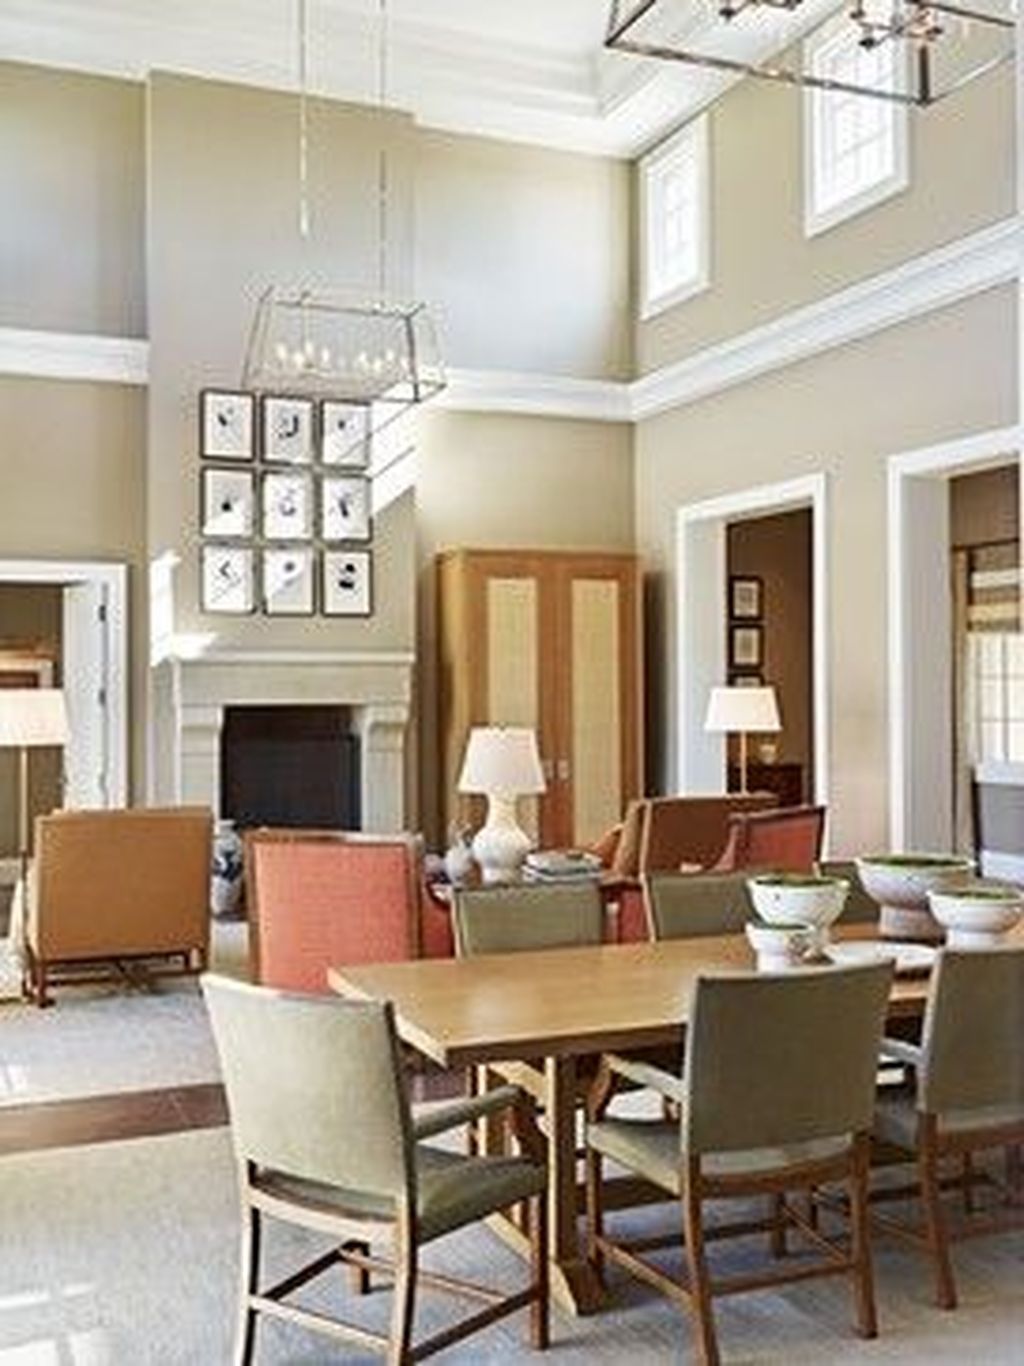 99 Fascinating Flying Crown Molding Ideas -   24 dining decor crown moldings
 ideas